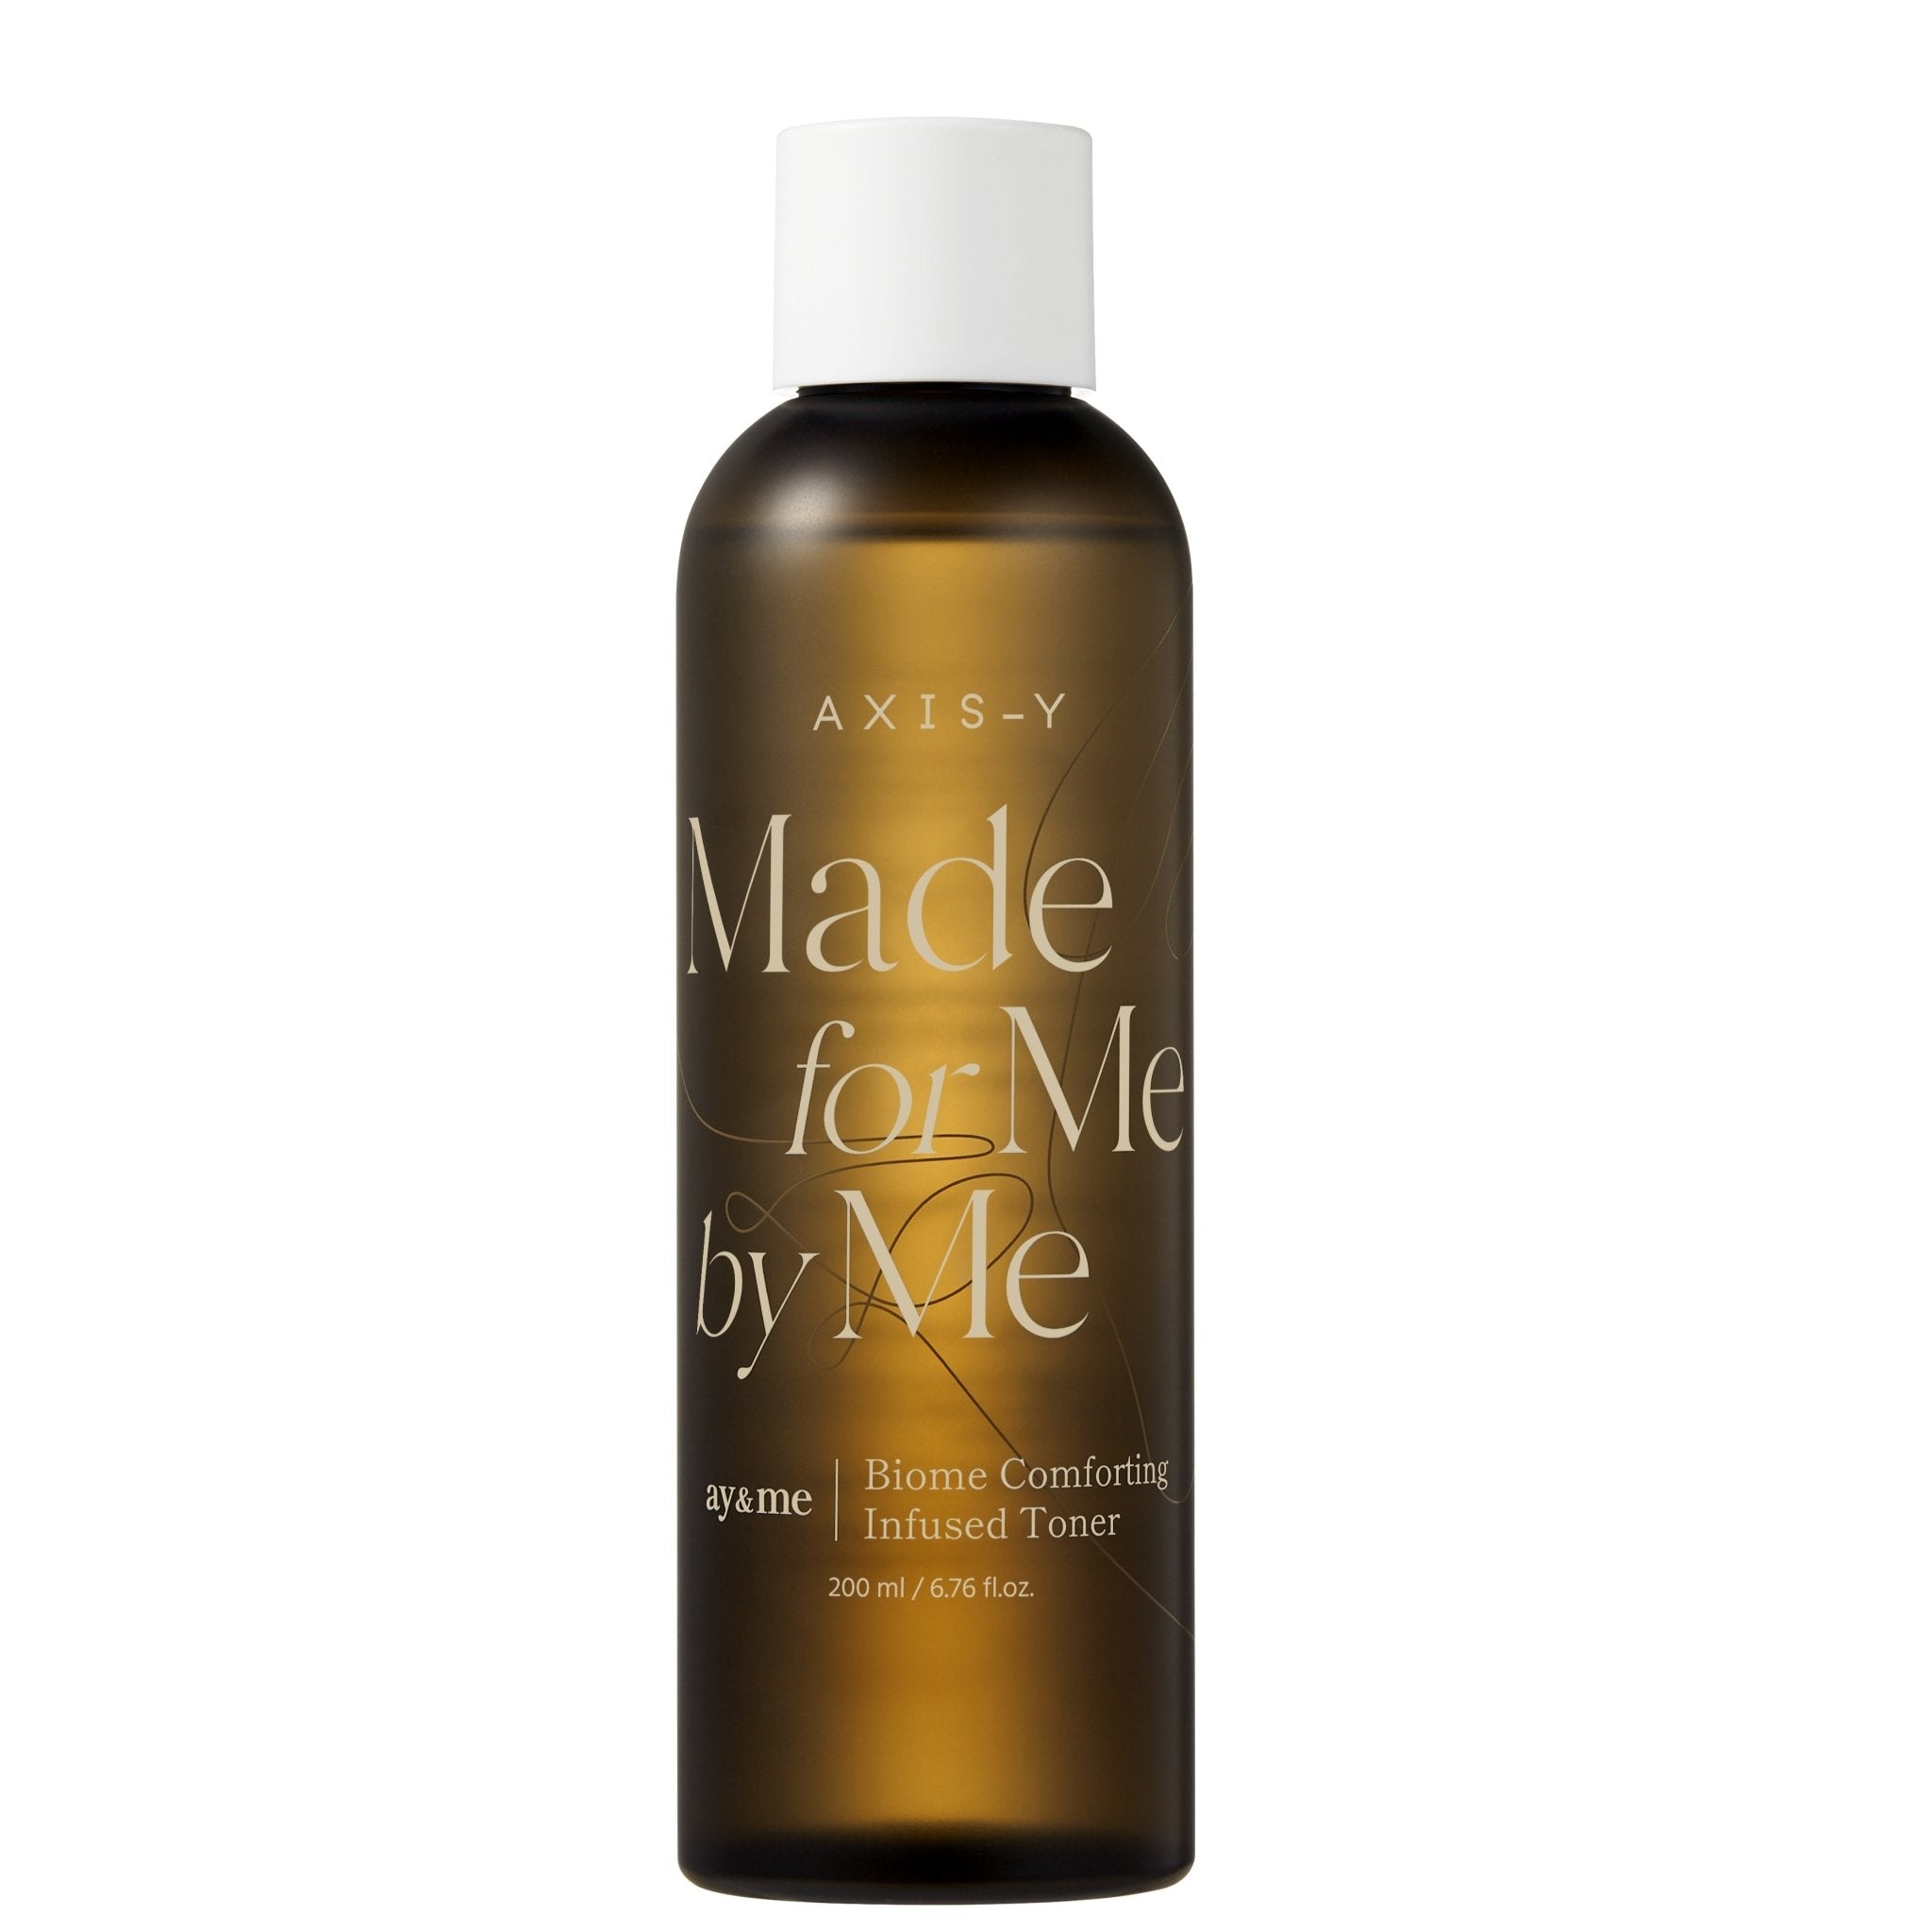 Axis-Y Biome Comforting Infused Toner 200ml - AXIS-Y | Kiokii and...